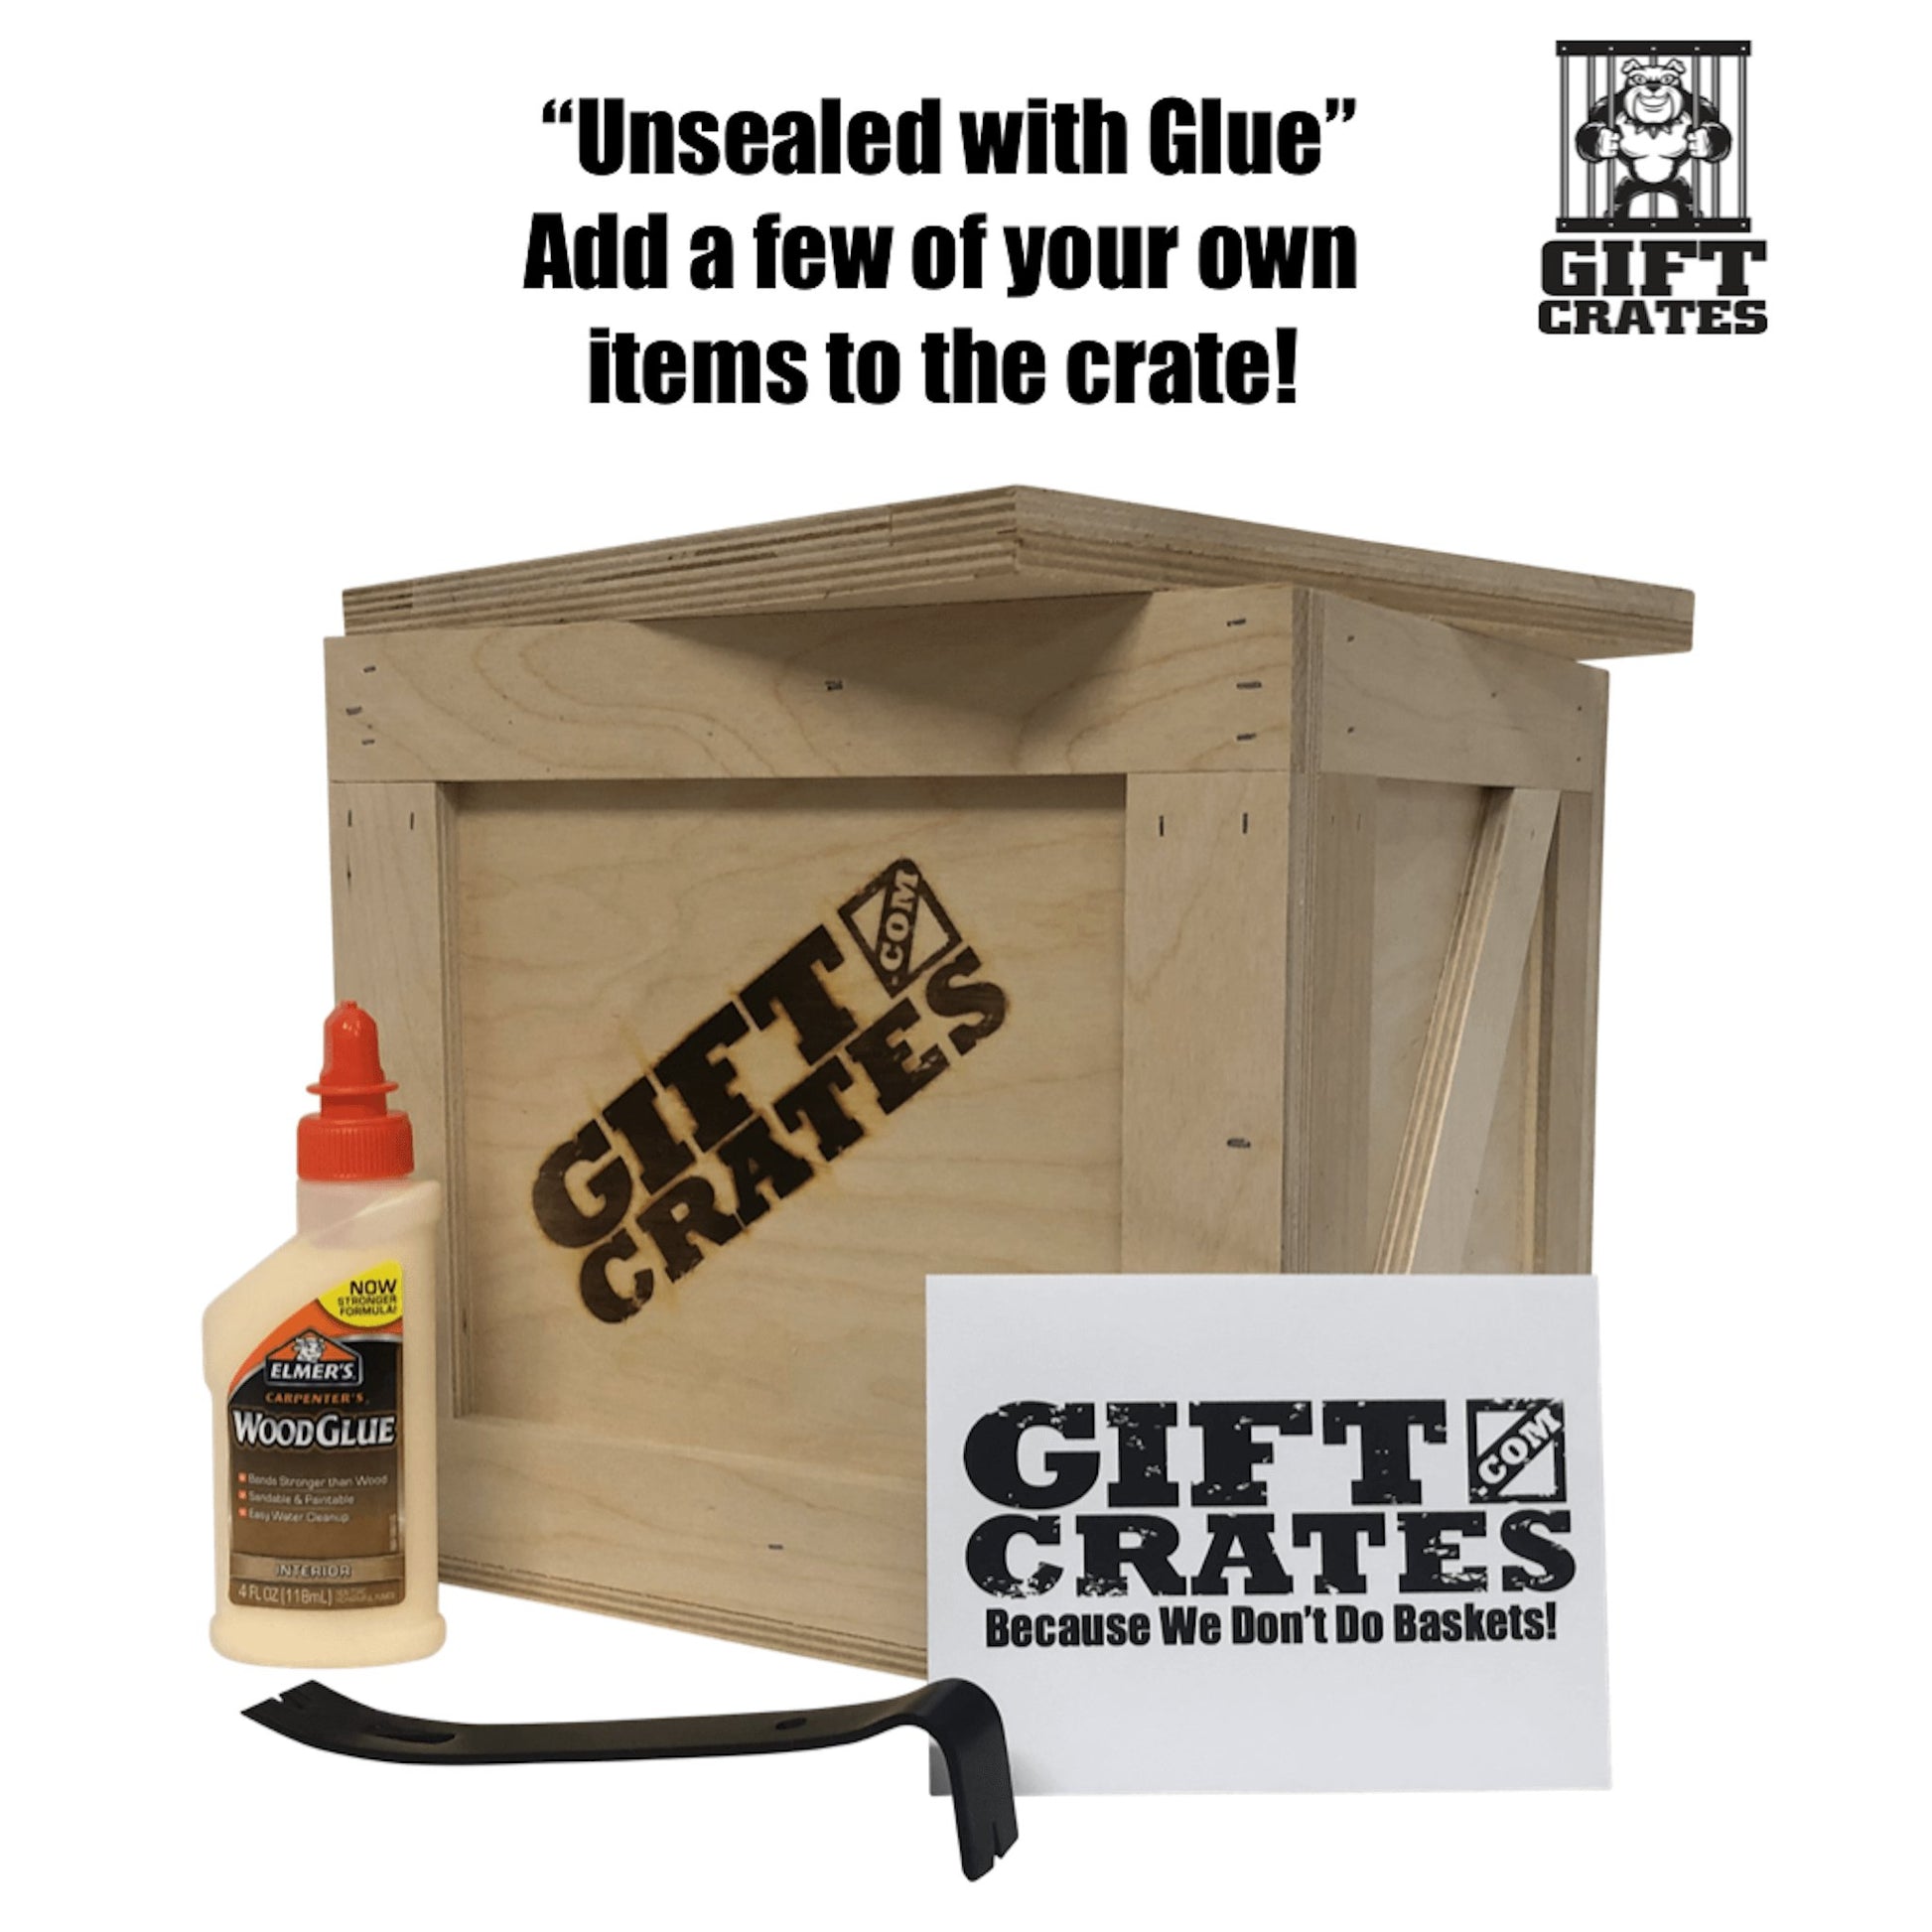 It's Five O'Clock Somewhere! - Gift Crates